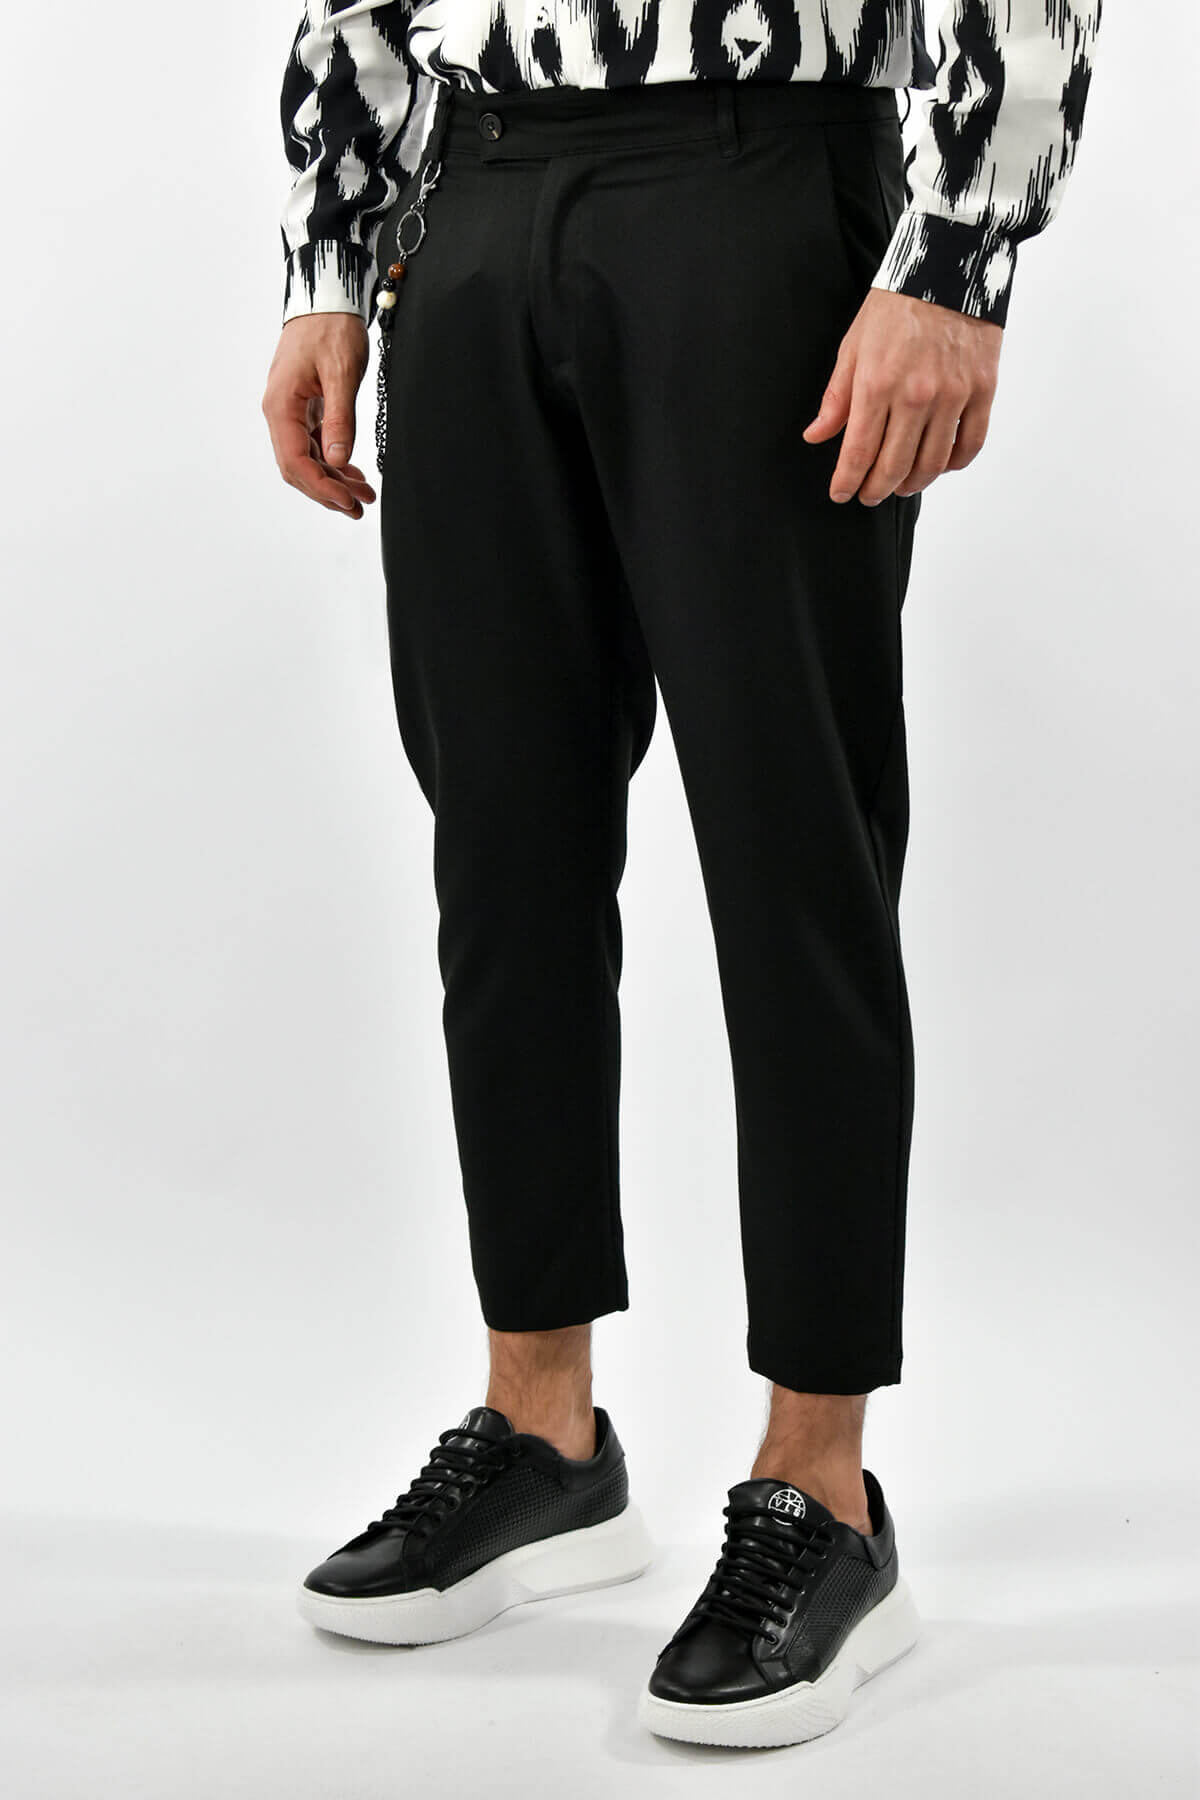 Up Gent Chinos Pants